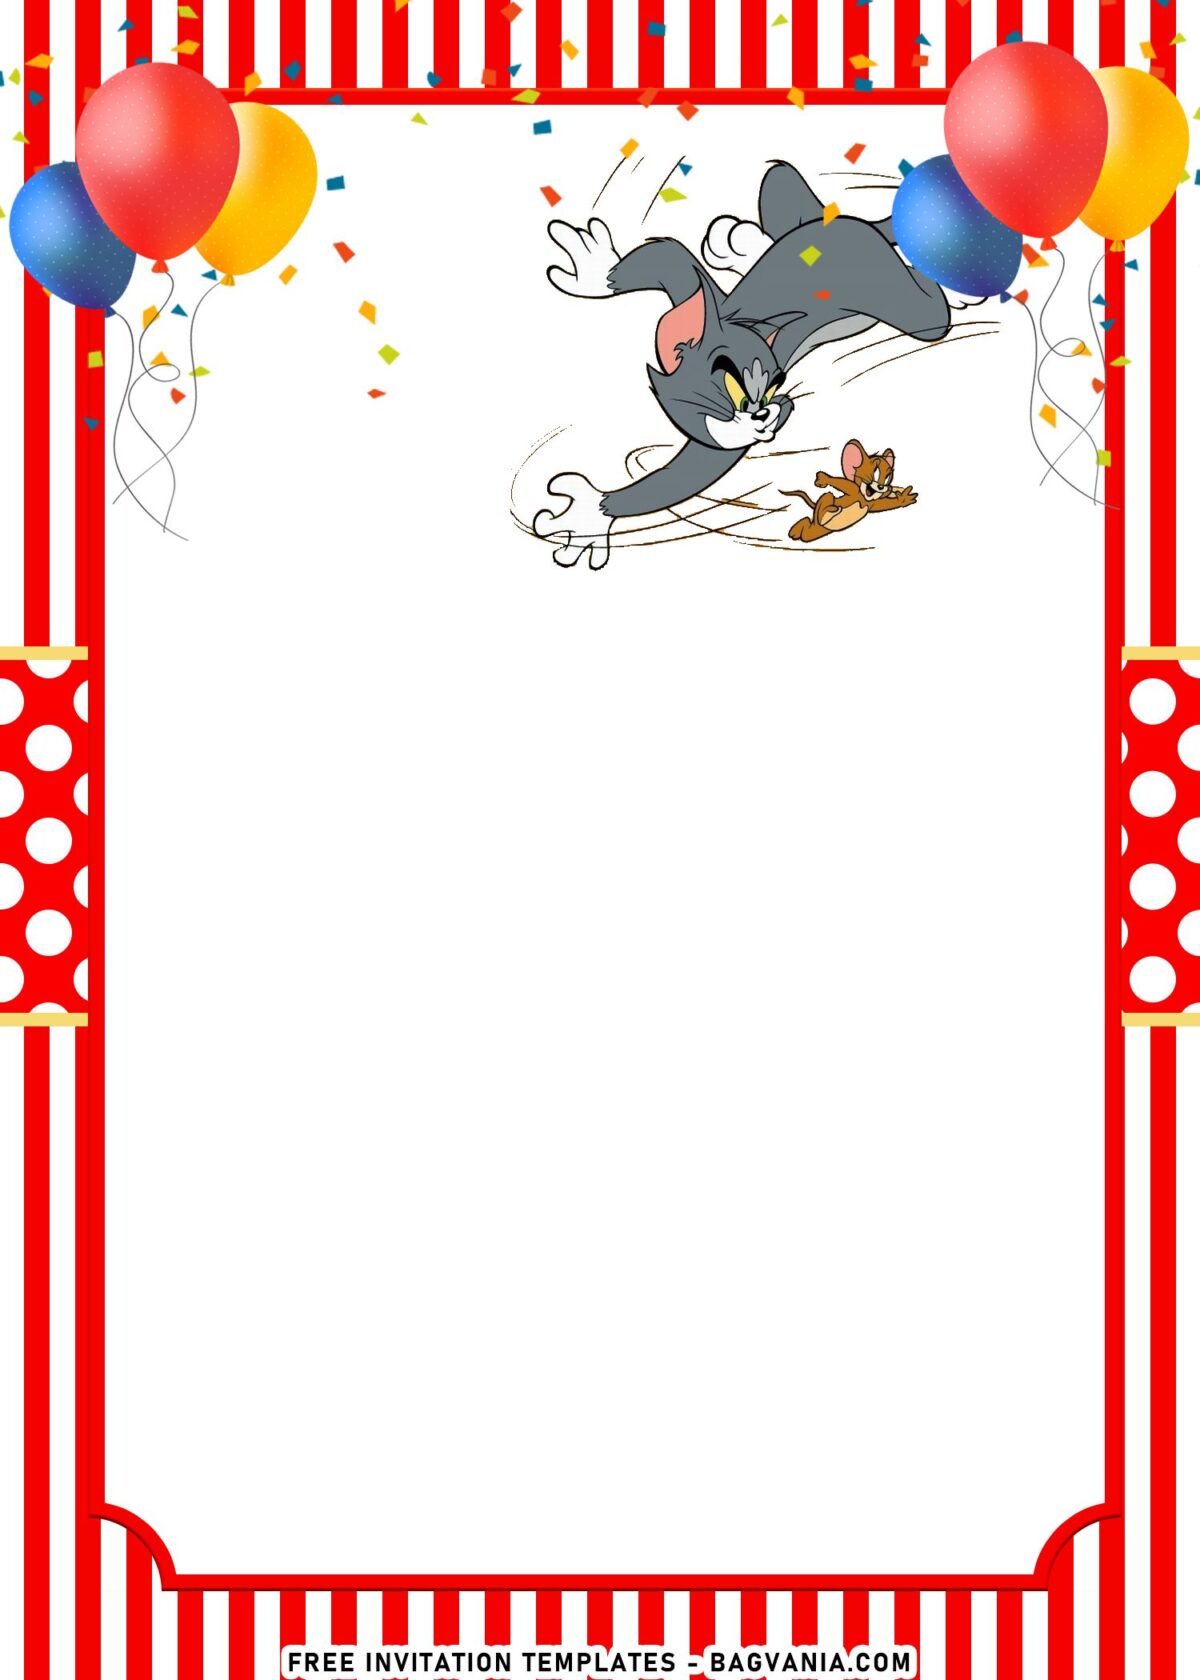 10+ Cartoon Tom And Jerry Birthday Invitation Templates with colorful balloons and coffetti